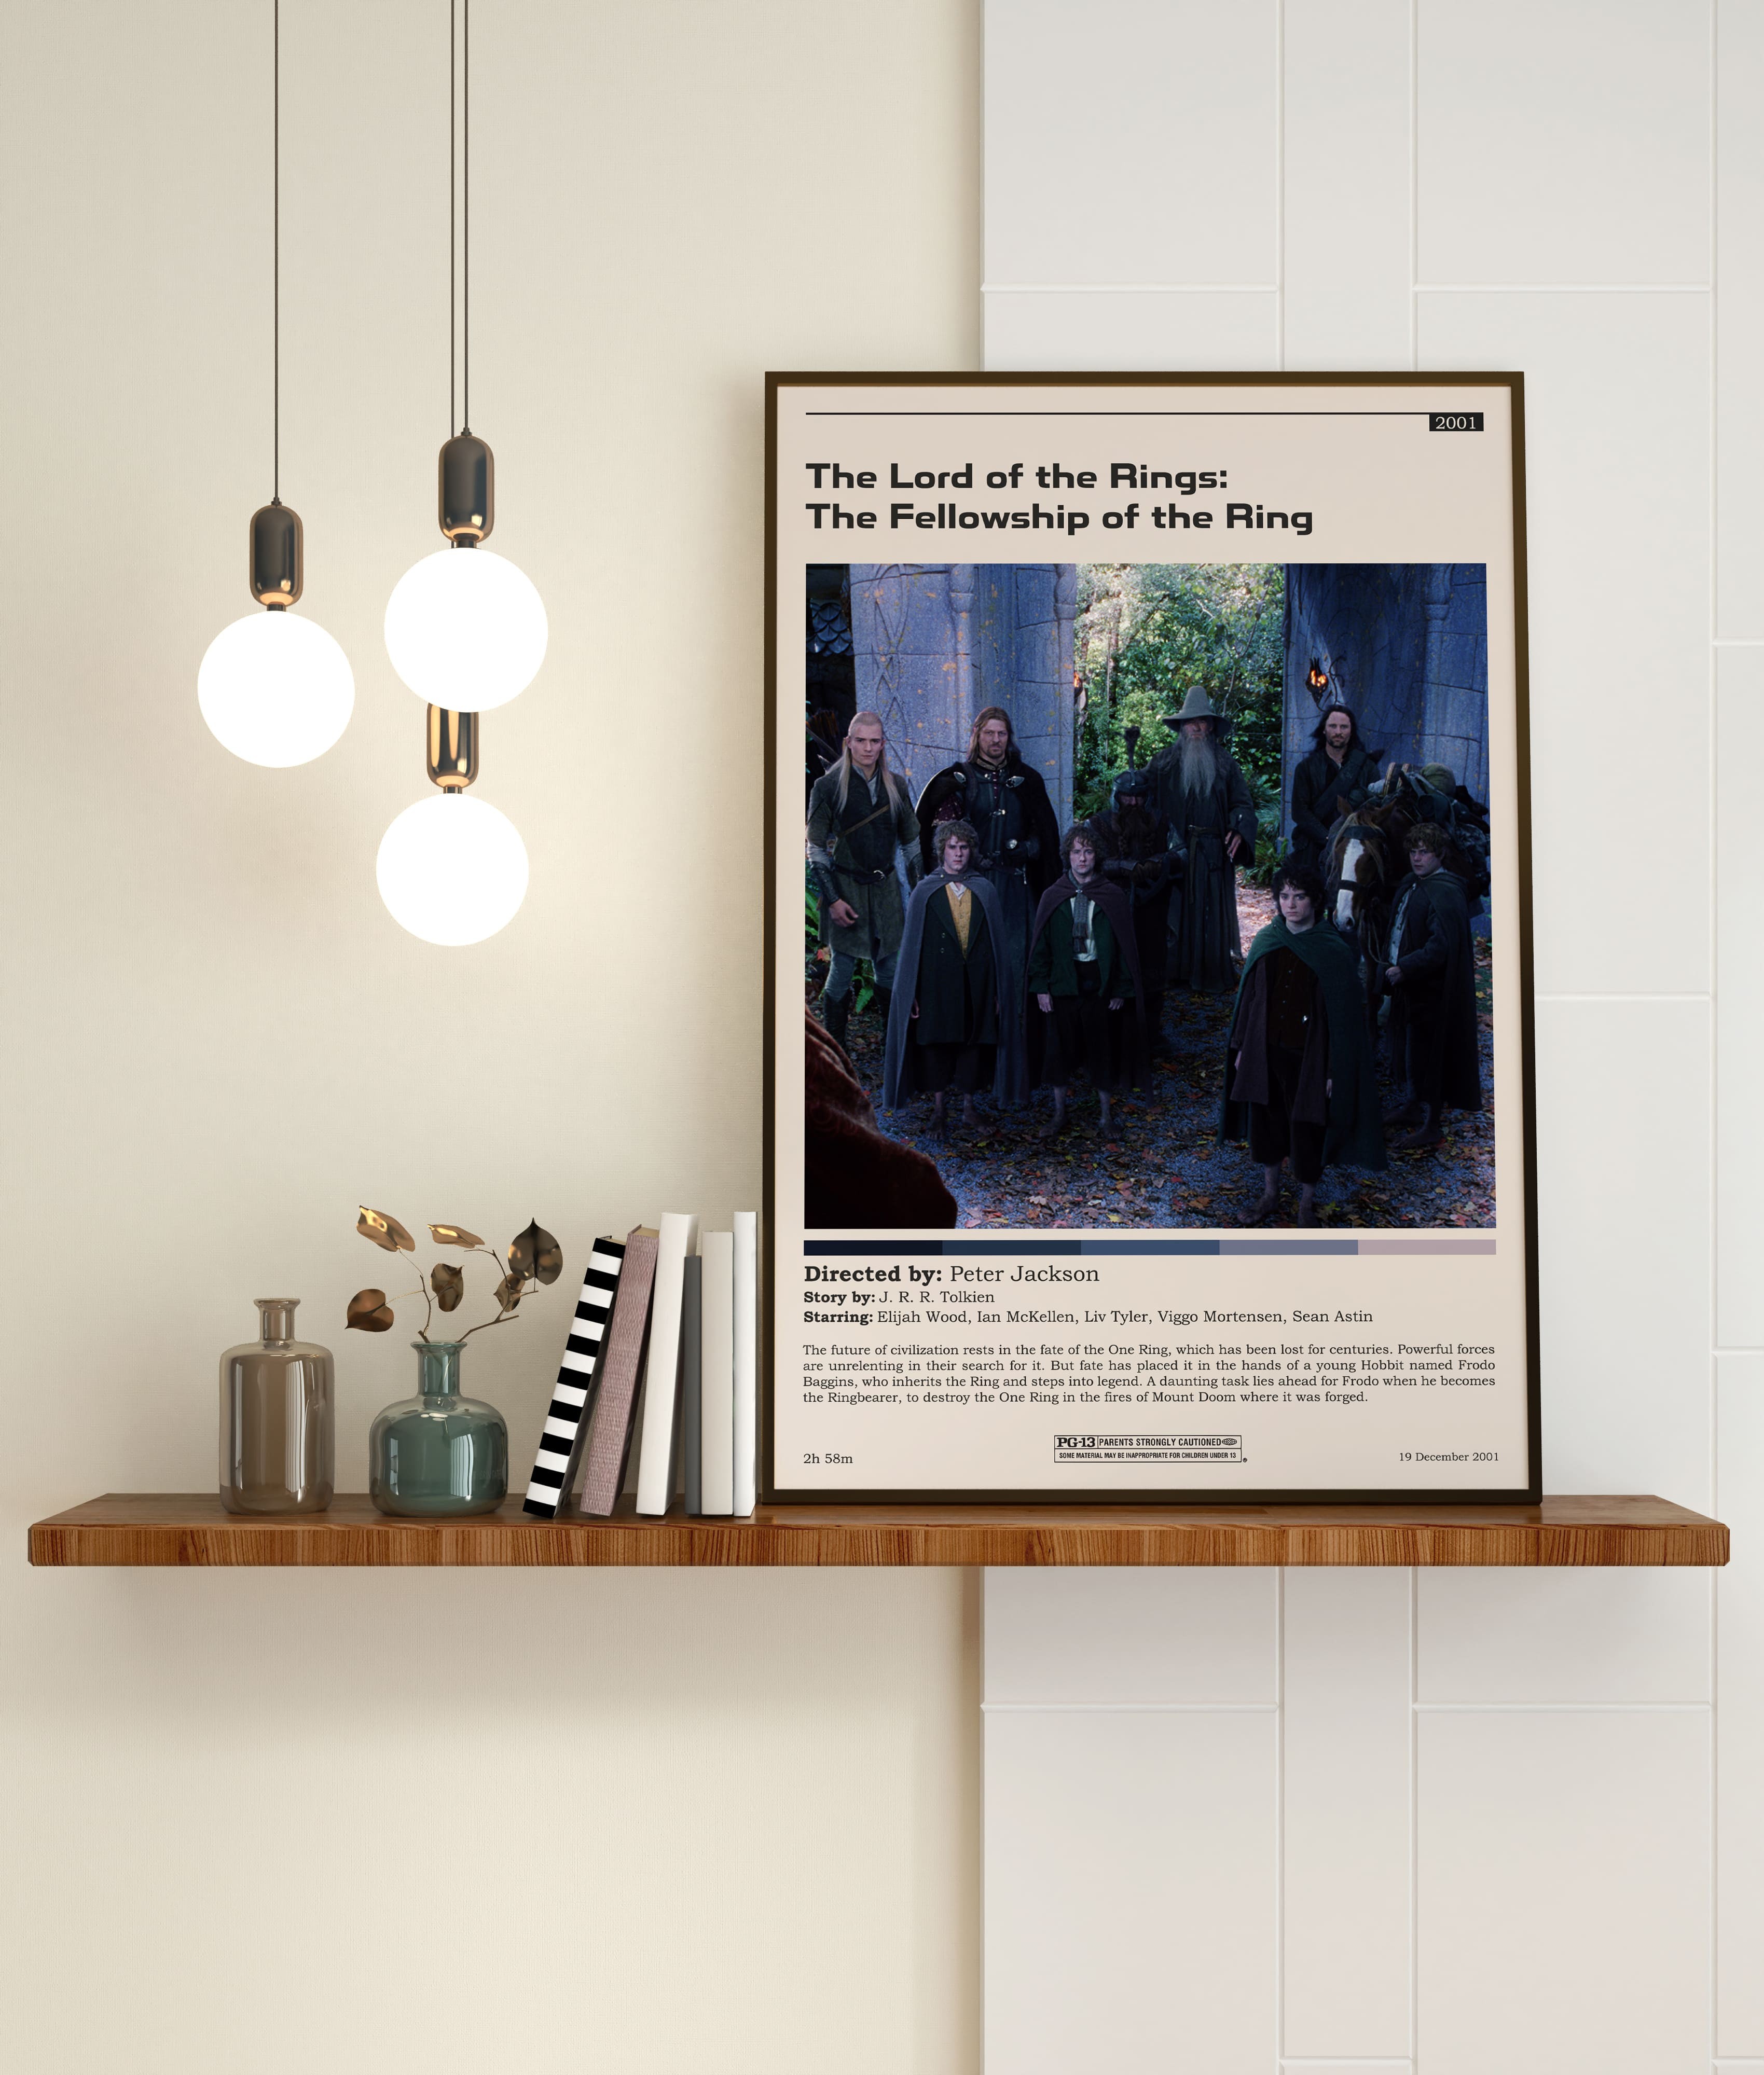 The Lord of The Rings The Fellowship of The Ring Print/The Lord of The Rings The Fellowship of The Ring Wall Art/The Lord of The Rings The Fellowship of The Ring Poster